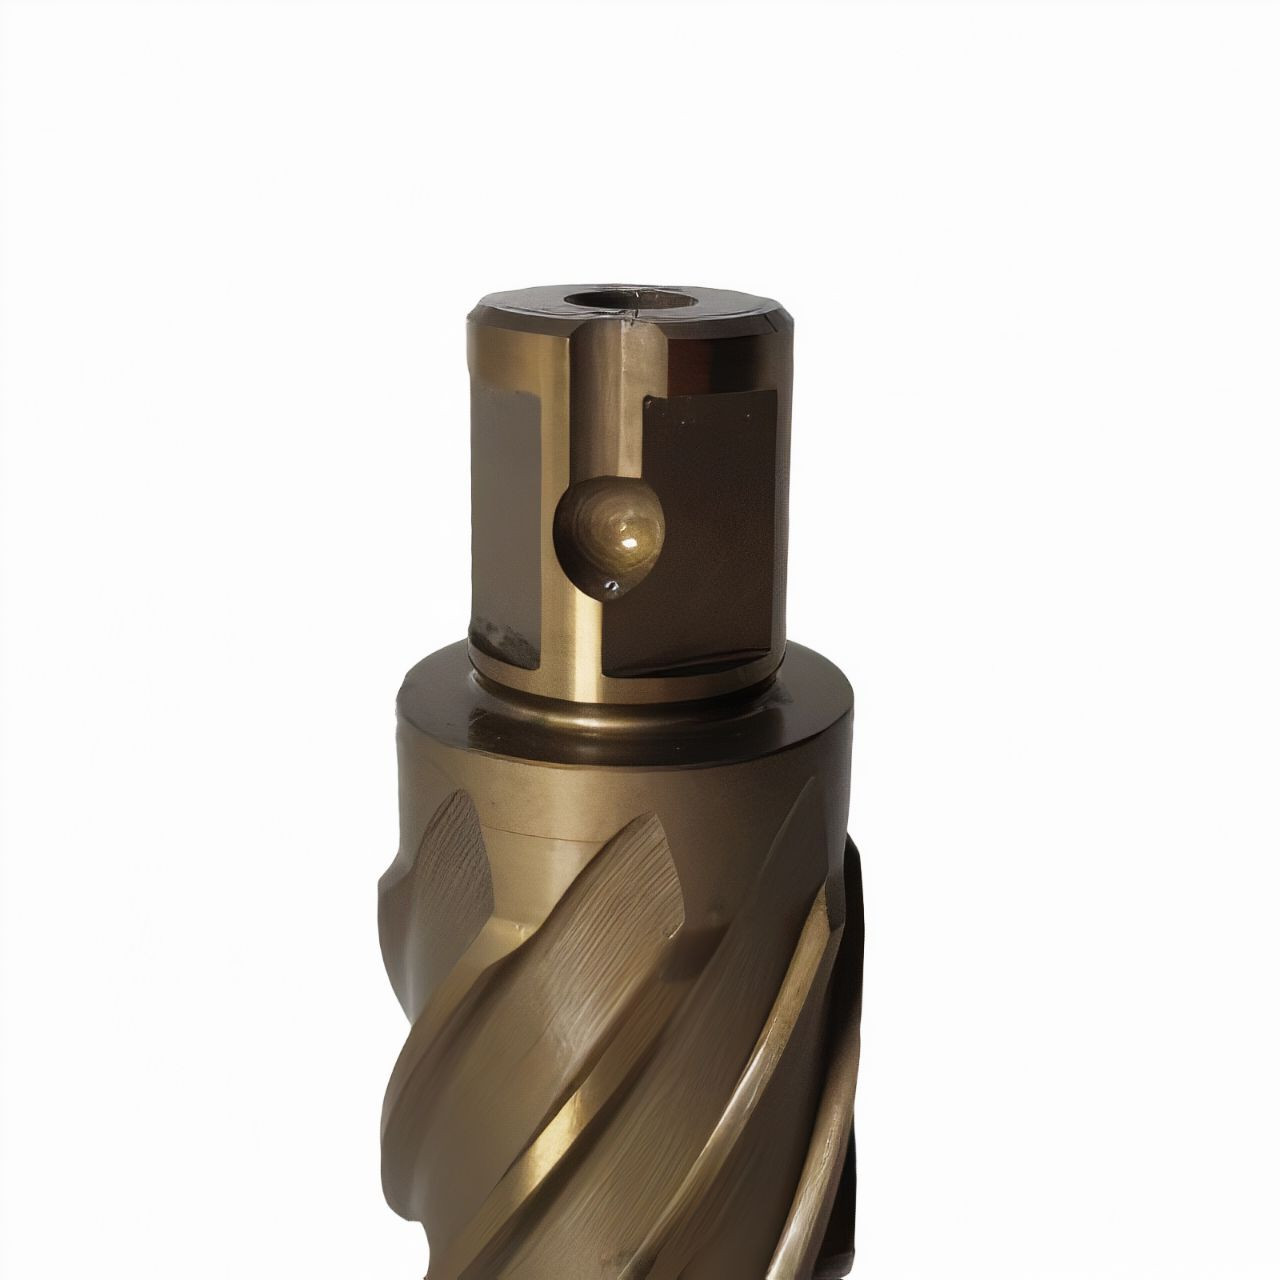 59 X 50 HSS-Co Excision Core Drill